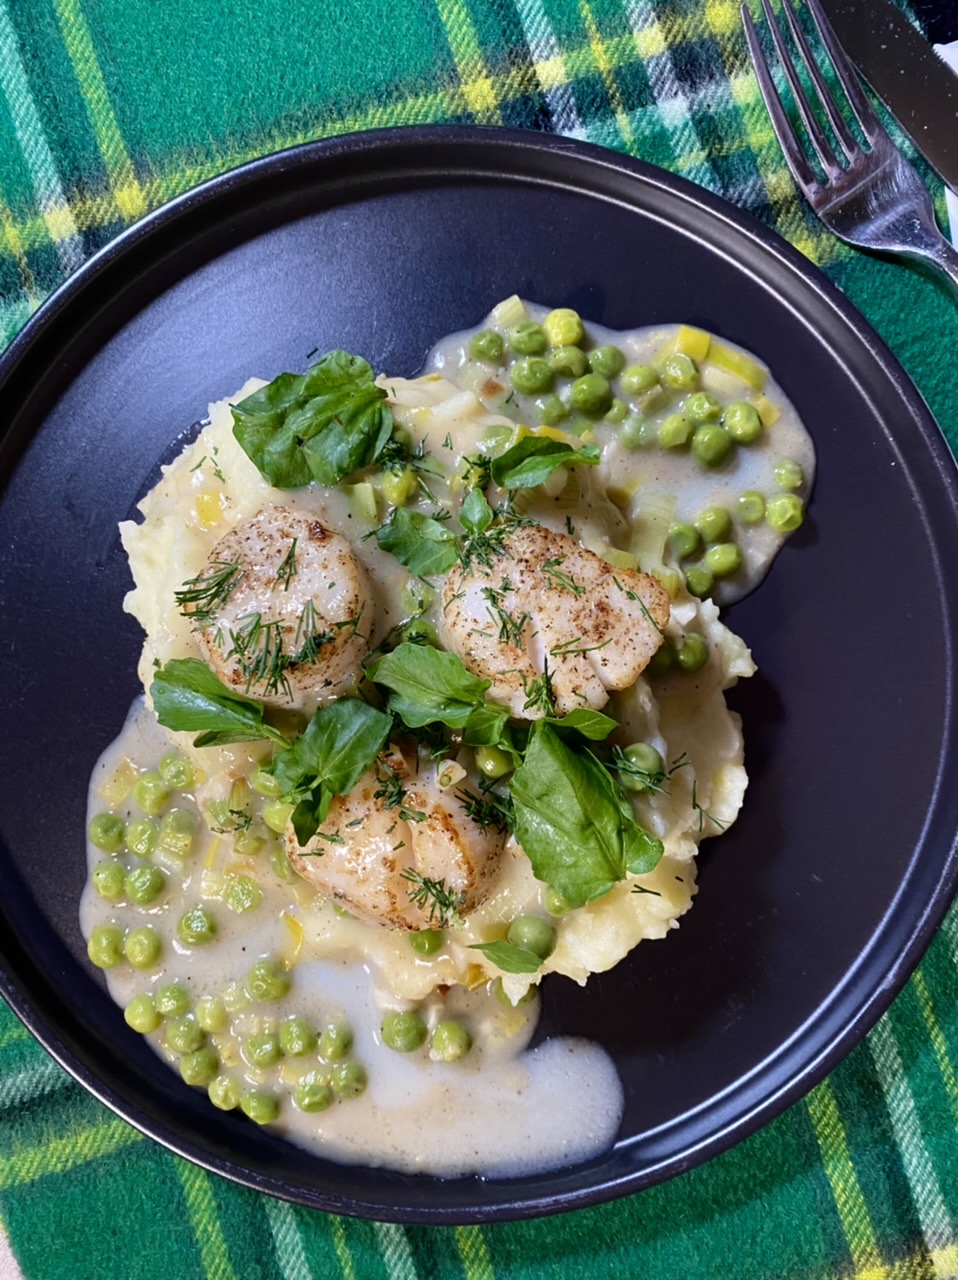 4E781F4D D5EB 4905 A9B3 FF3F84E995F5 - Irish Scallops with Leeks and Peas over Mashed Potatoes